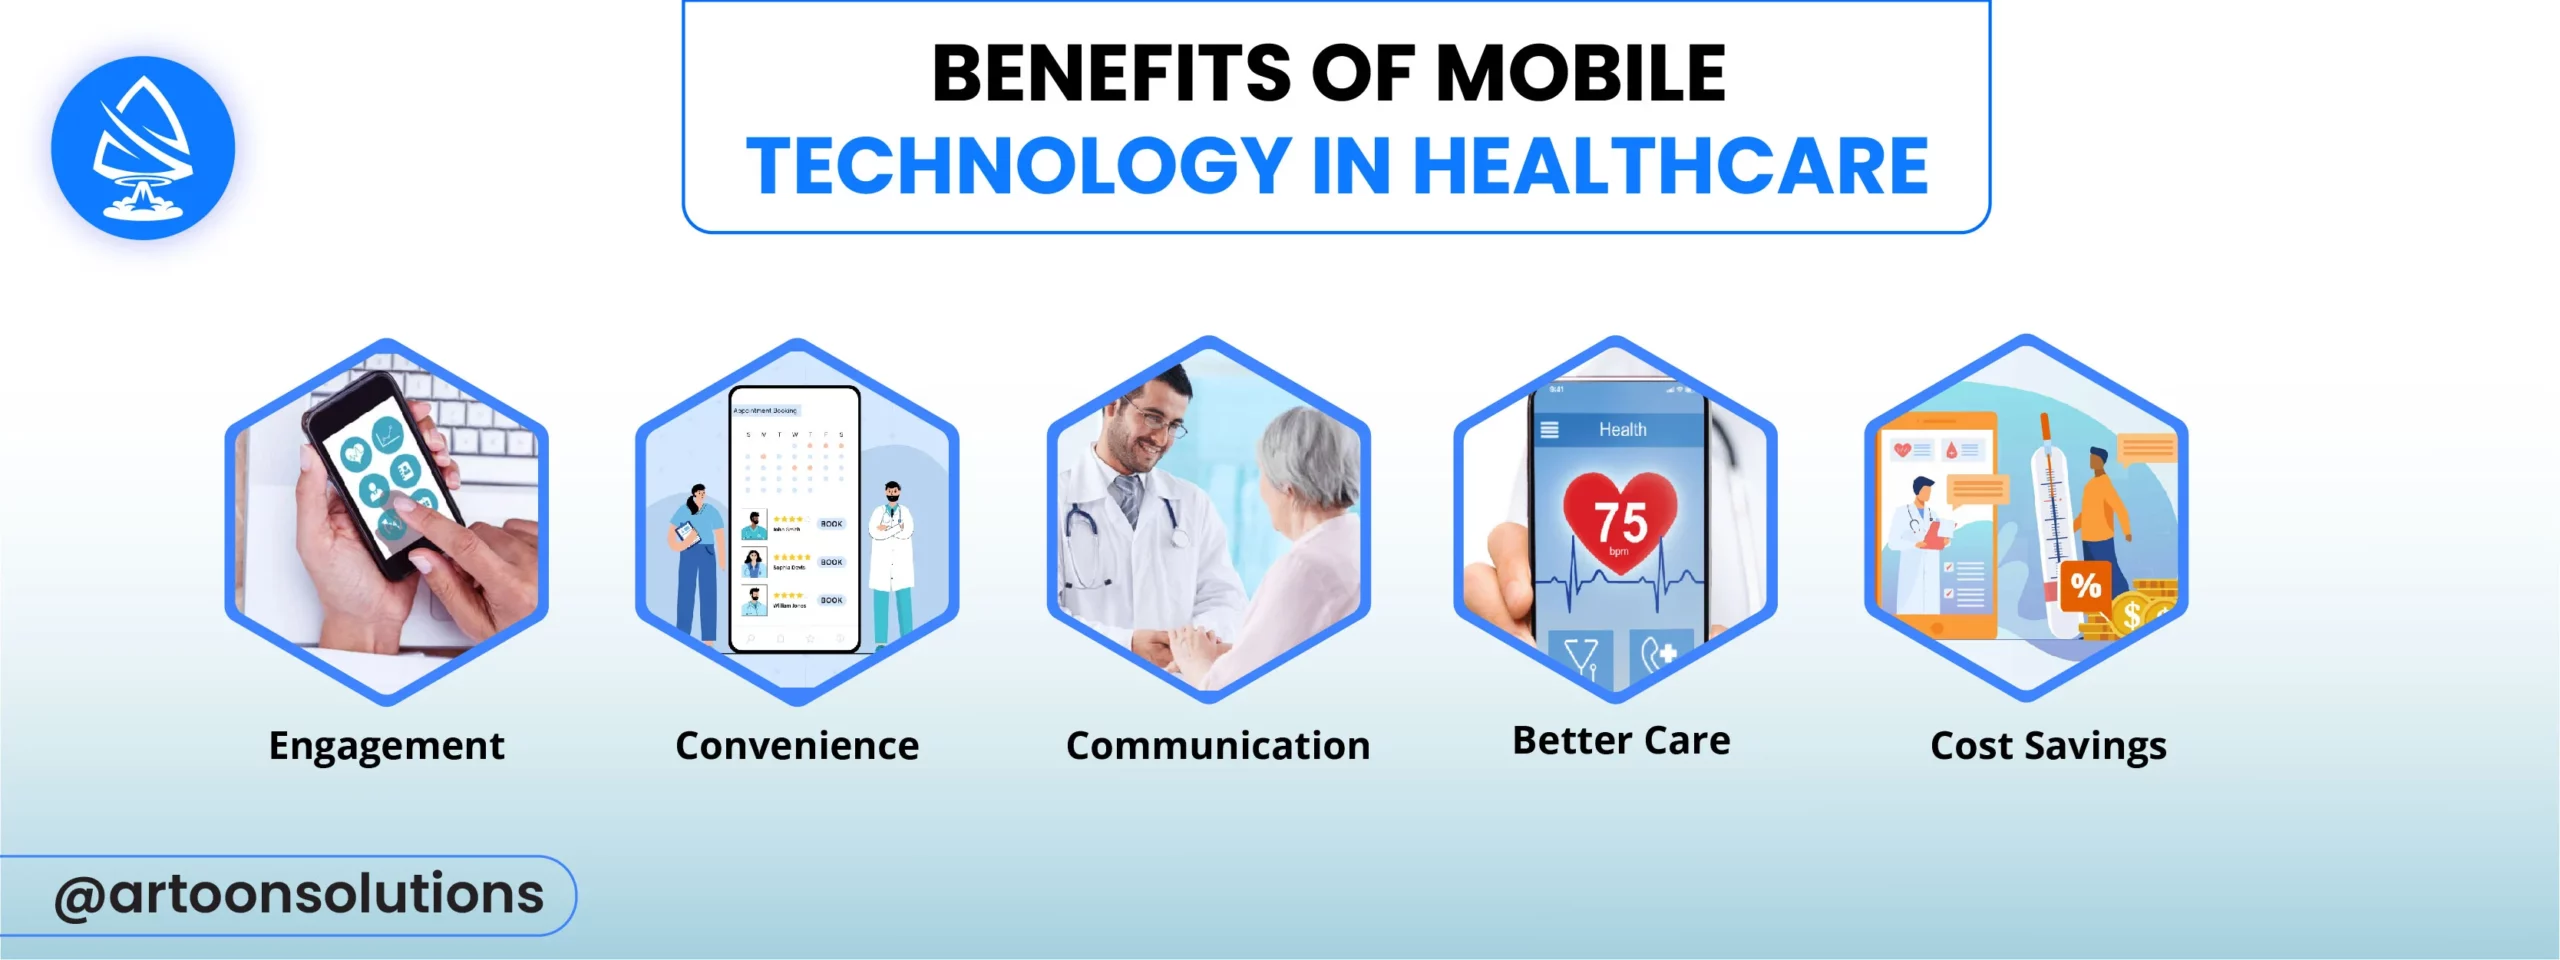 Benefits of Mobile Technology in Healthcare